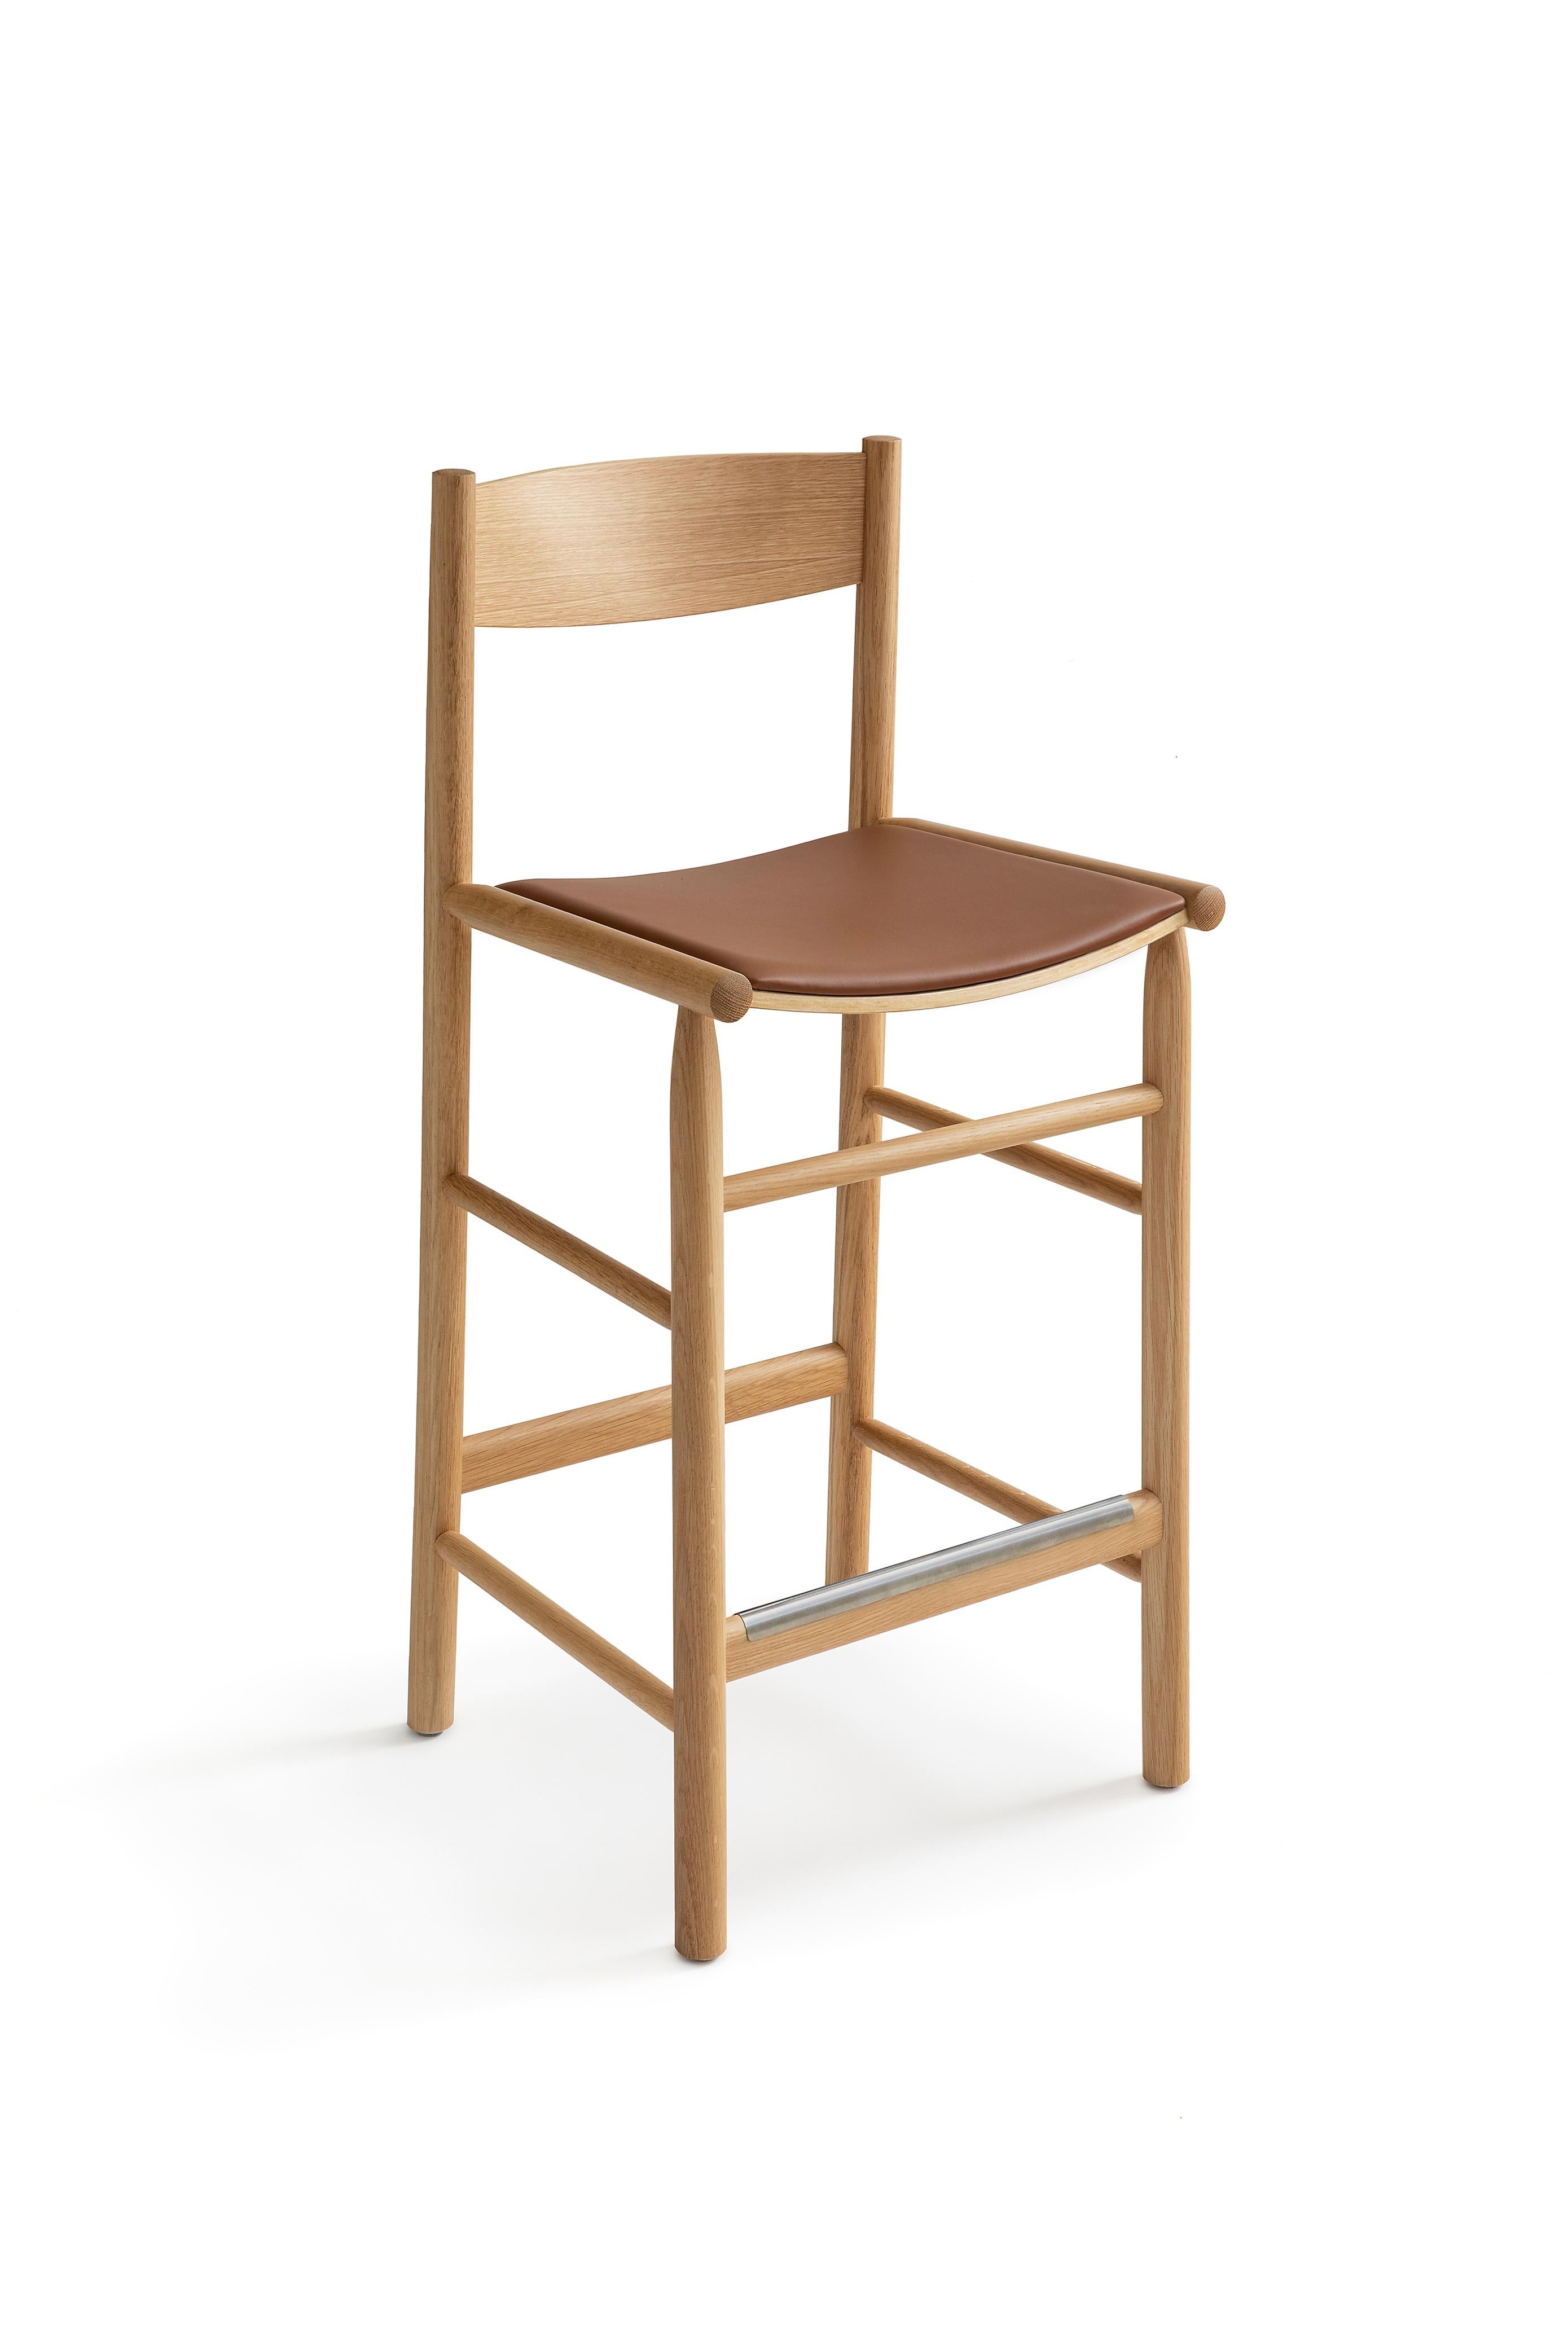 Hand-Crafted Akademia High Chair in Oak or Ash by Wesley Walters & Salla Luhtasela For Sale